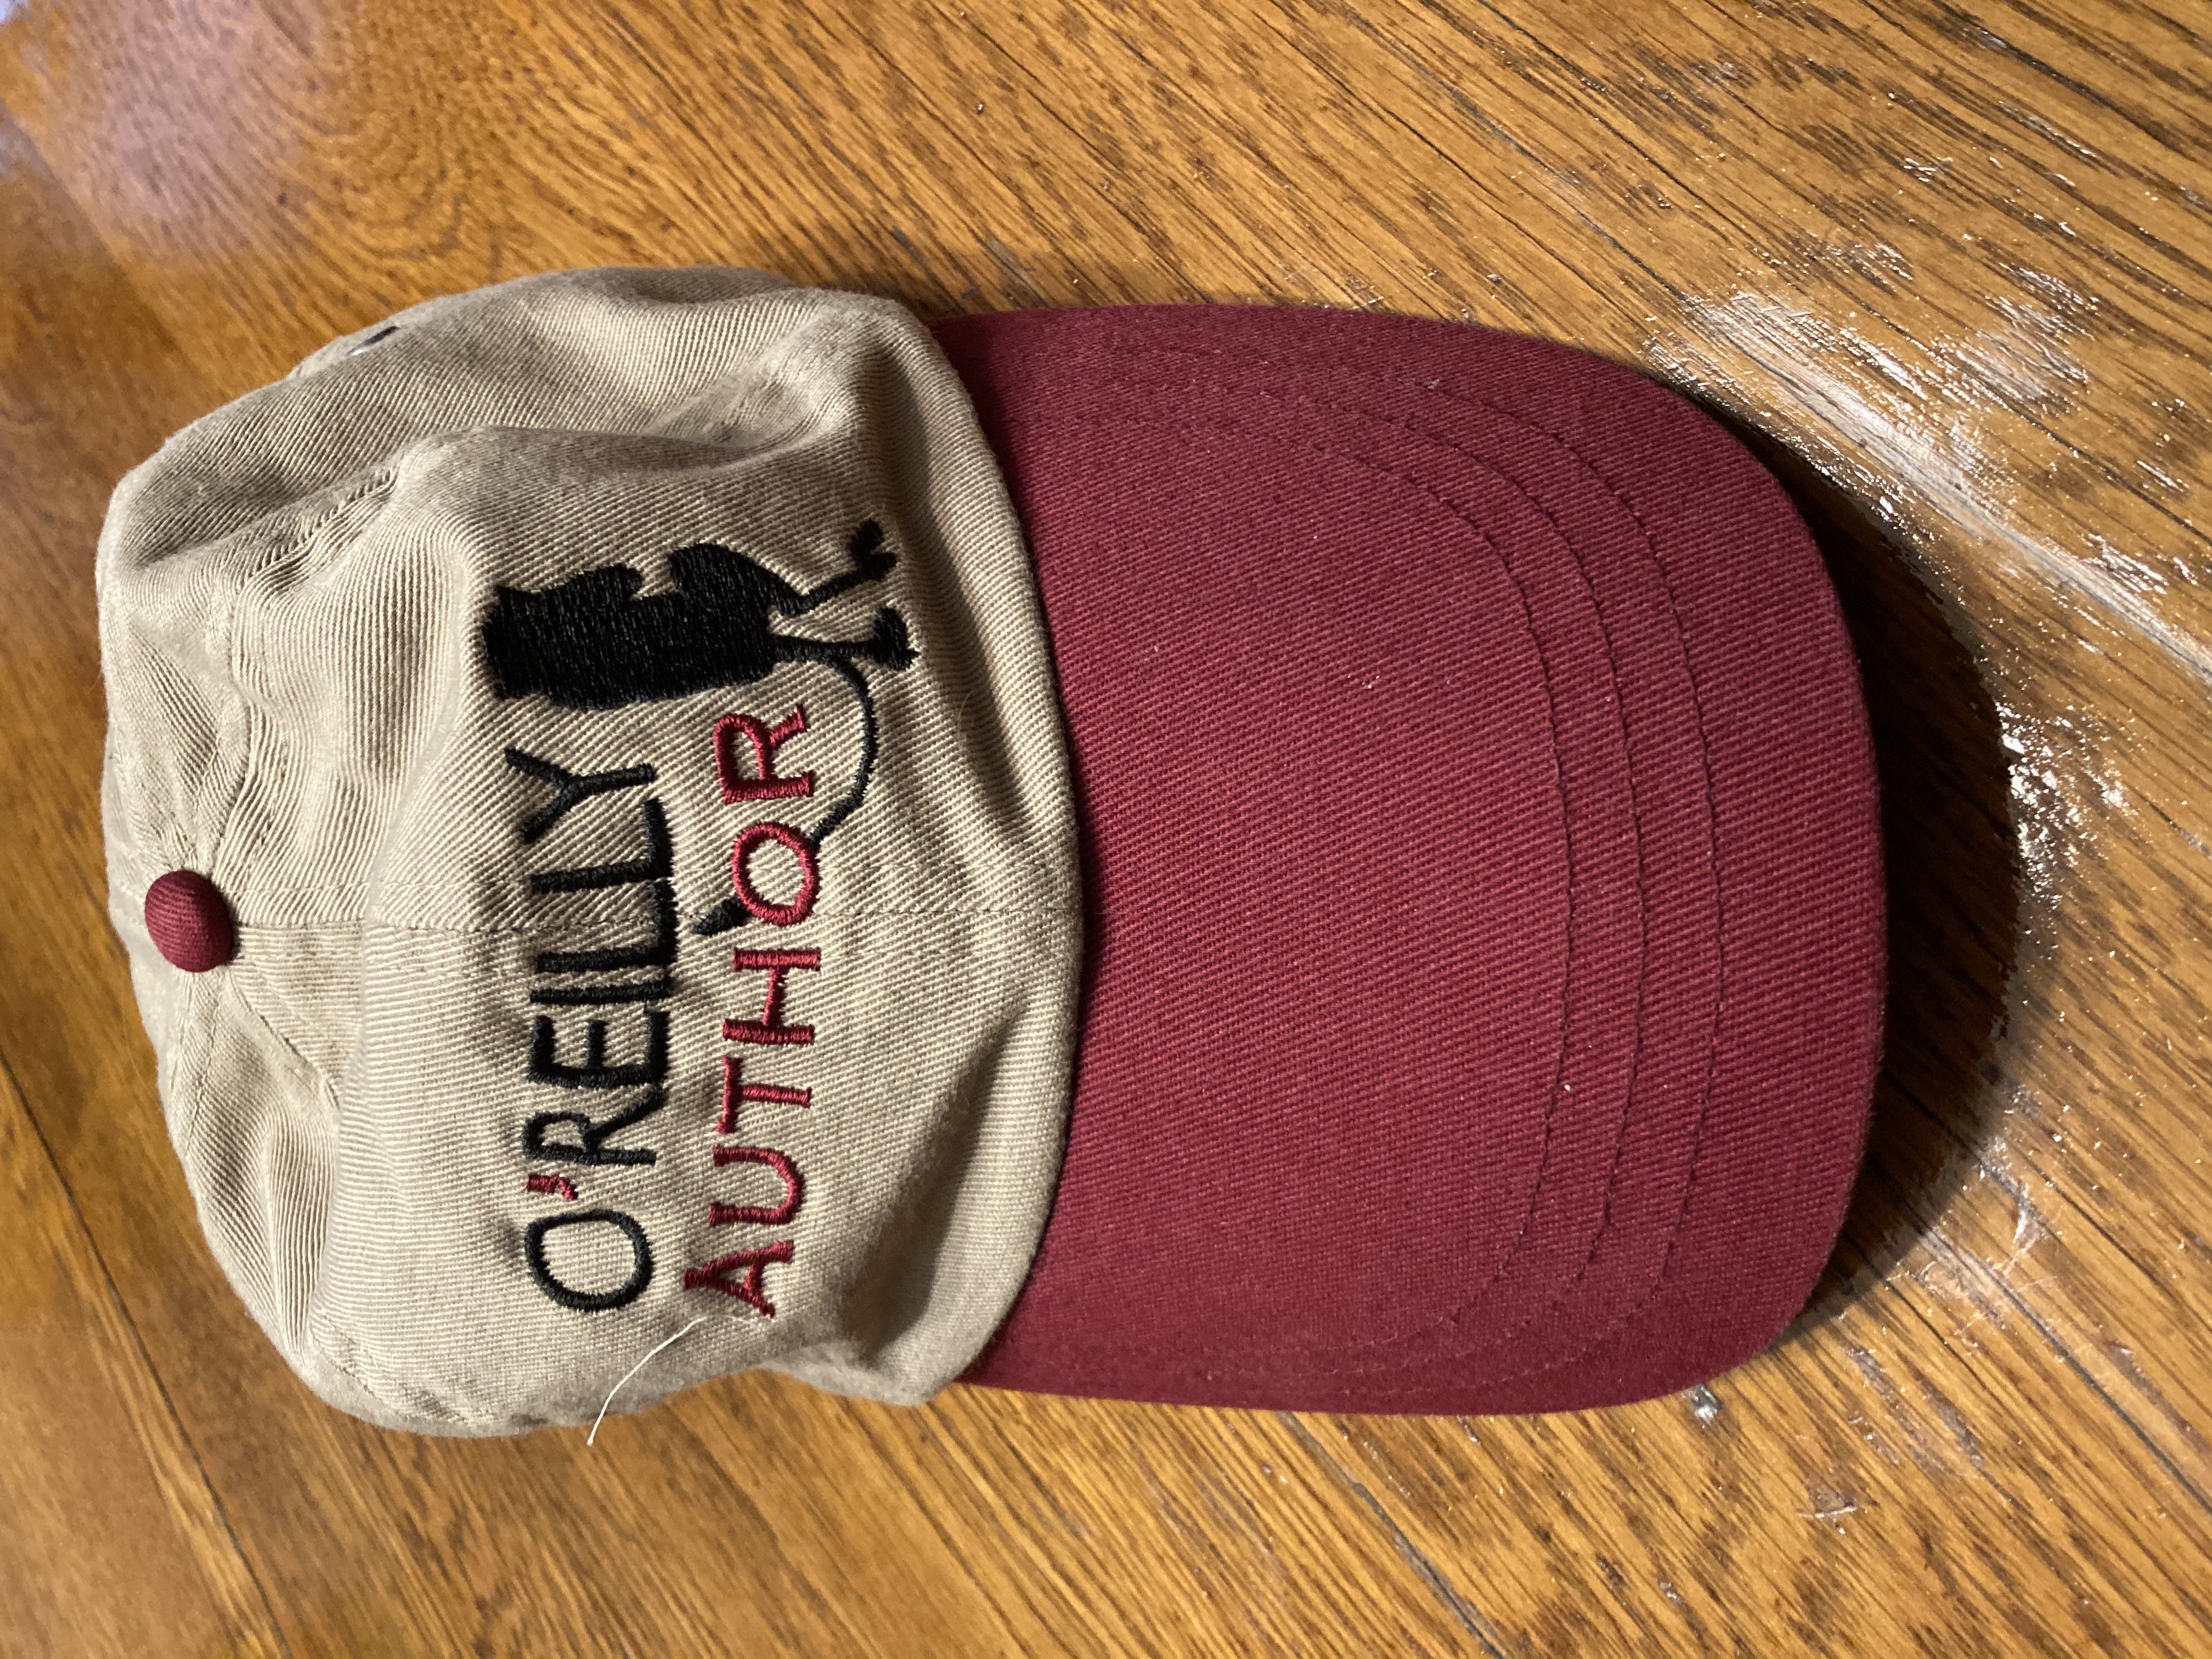 Photo of an O'Reilly Author hat used at book signings and other public appearances